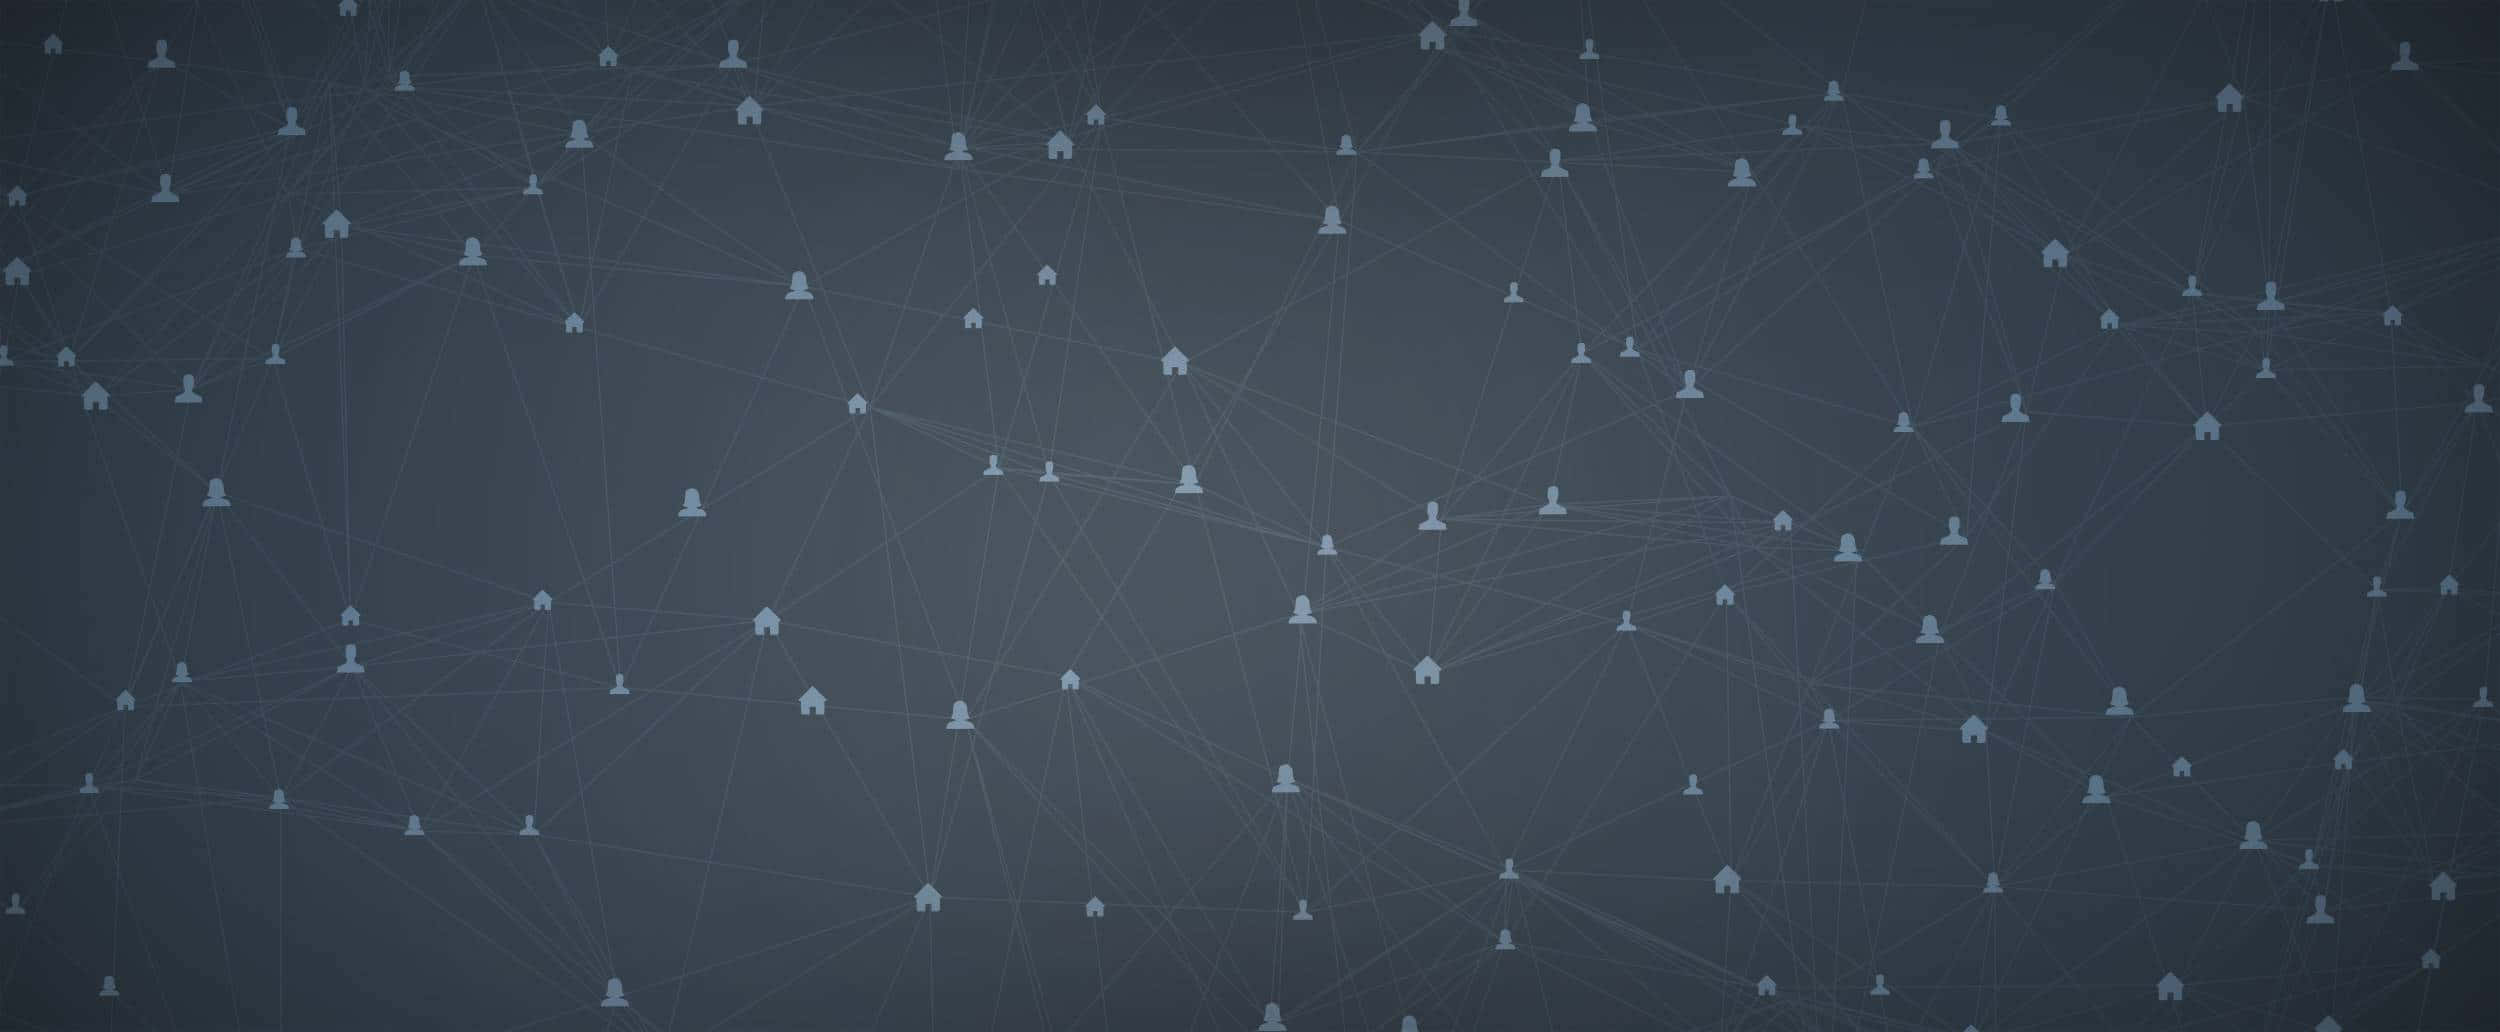 A Network Of People On A Dark Background